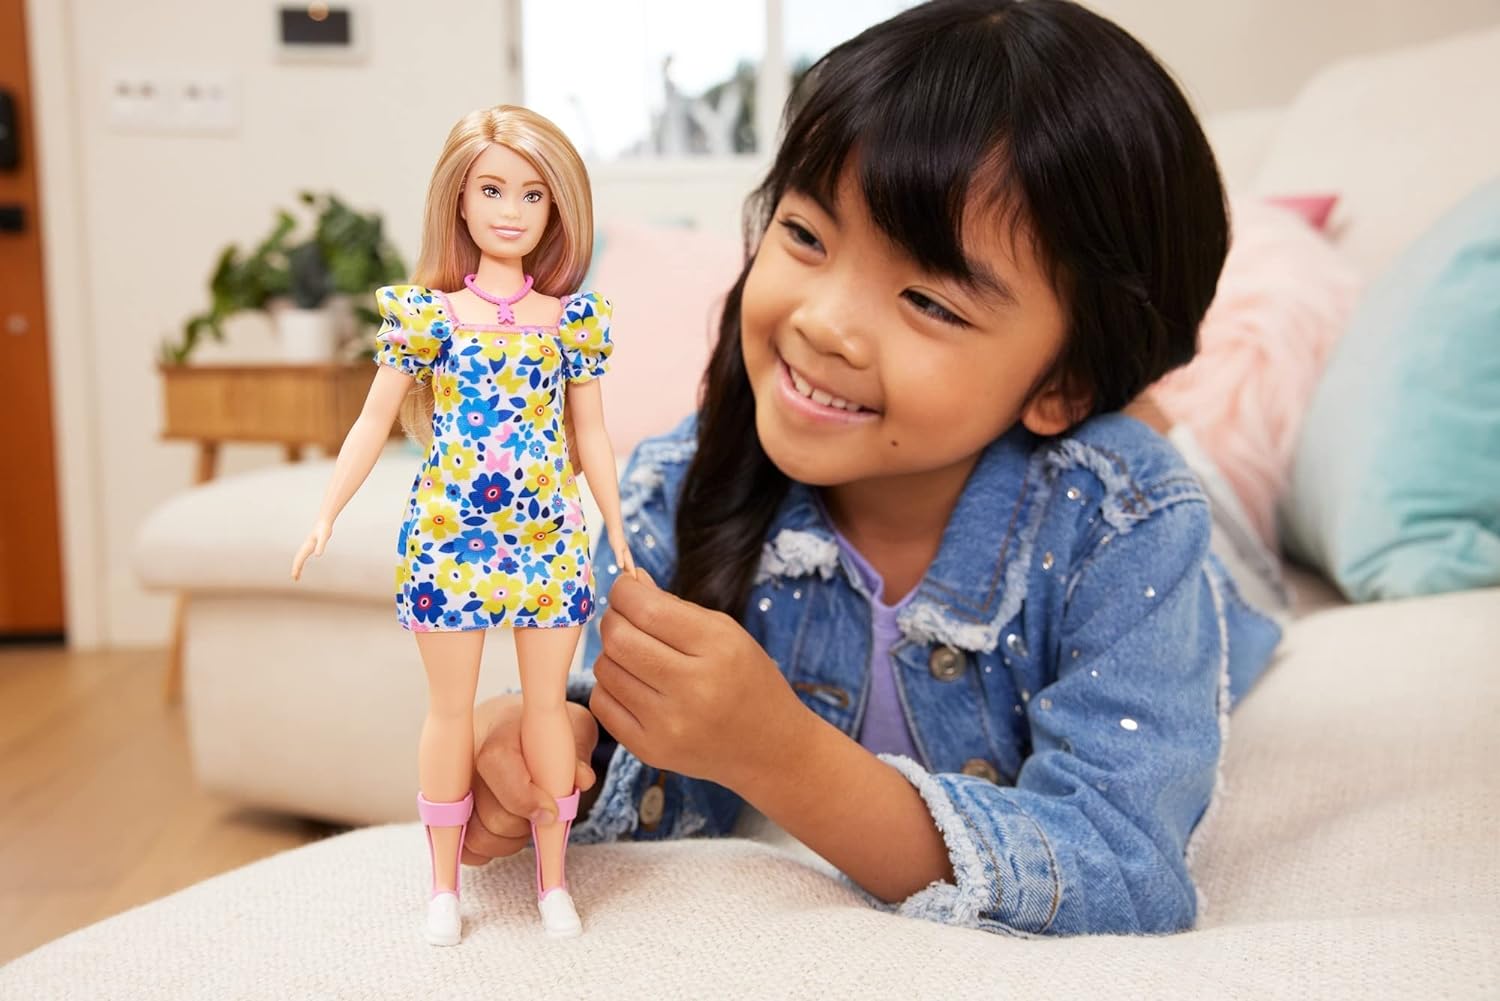 Mattel Barbie - Fashionistas Doll No.208 With Down Syndrome Wearing Floral Dress, Created in Partnership With The National Down Syndrome Society HJT05 (FBR37)